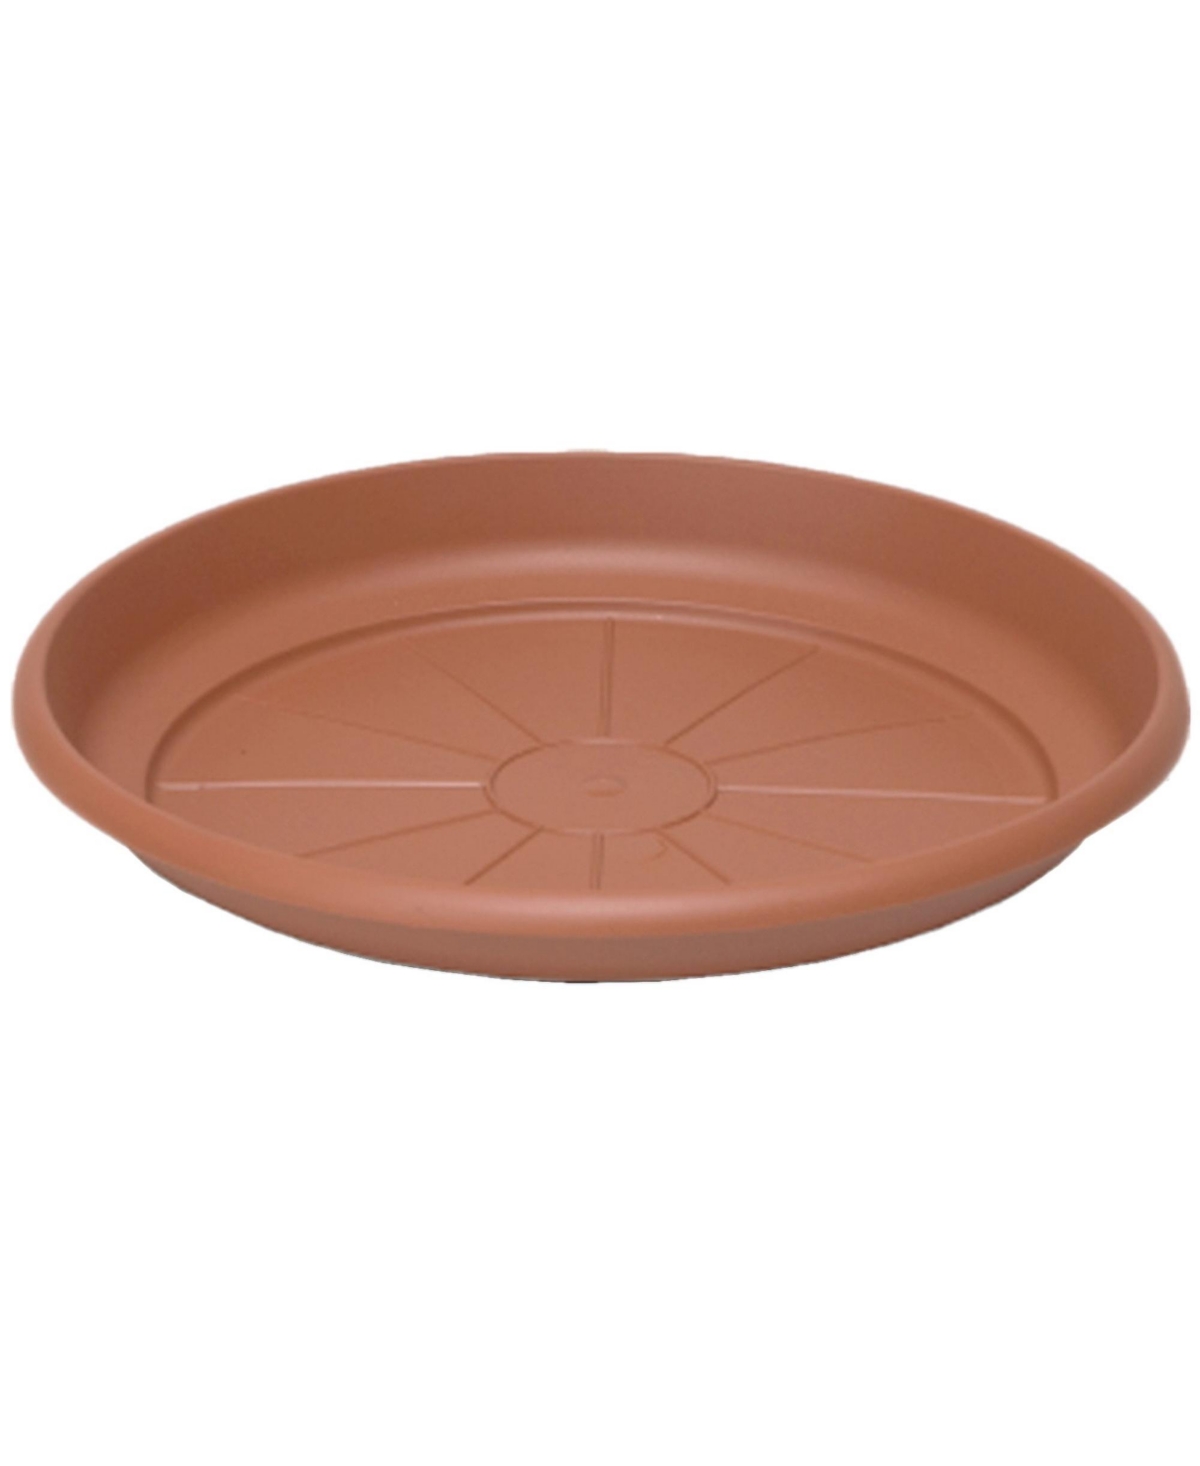 In Outdoor Emma Round Plastic Flower Pot Terracotta Colored Saucer, 15 Inches - Terracotta